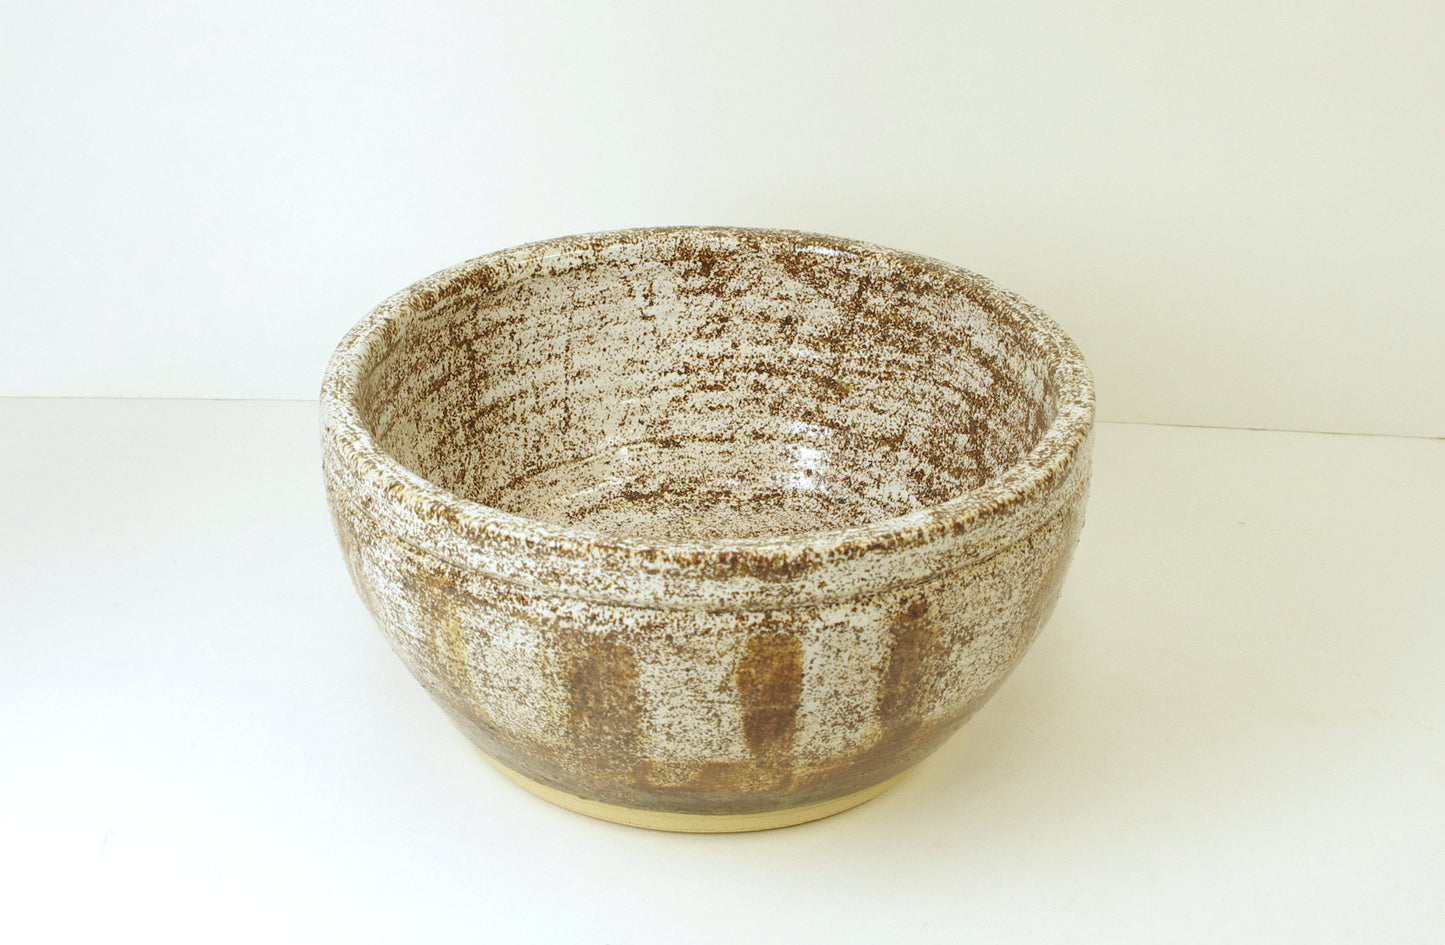 2080, Hand Thrown Stoneware Dog Bowl, Heavy, Brown and White with Speckled Browns, 6 1/2 x 3 1/4